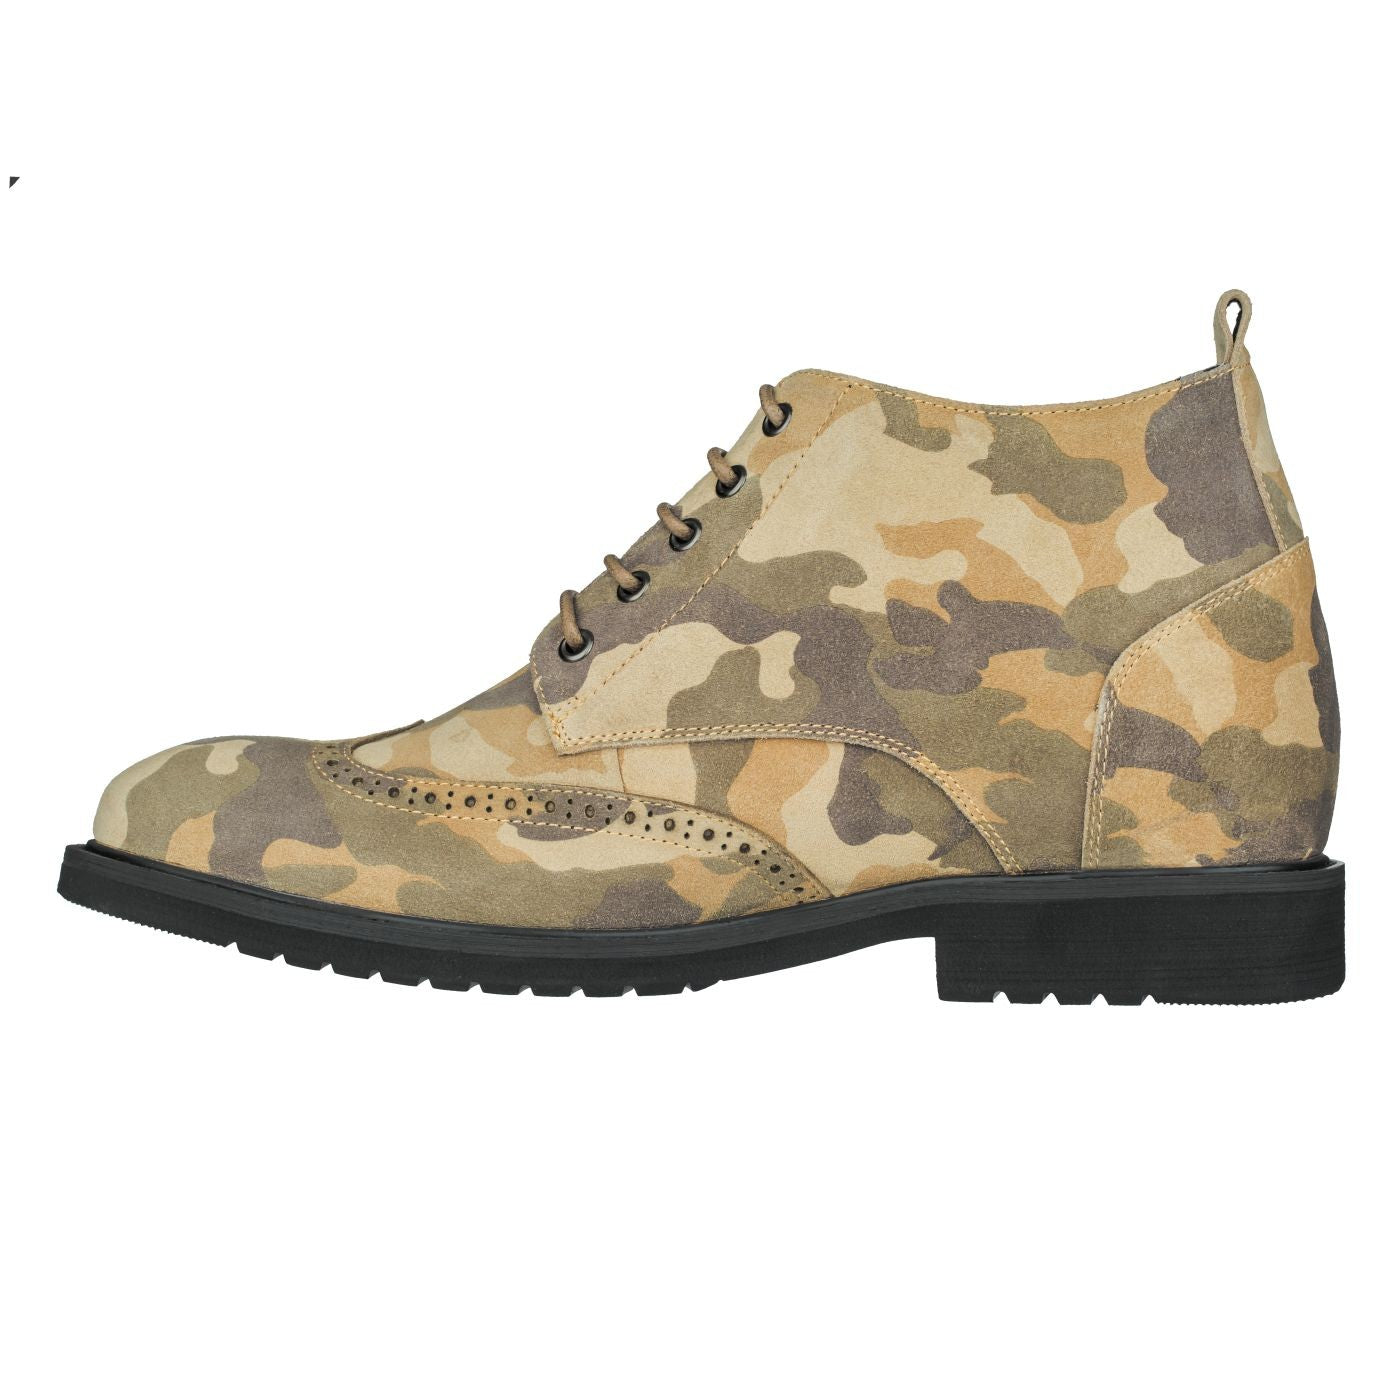 Elevator shoes height increase CALTO - S3650 - 3.0 Inches Taller (Camo Brown) - Lightweight